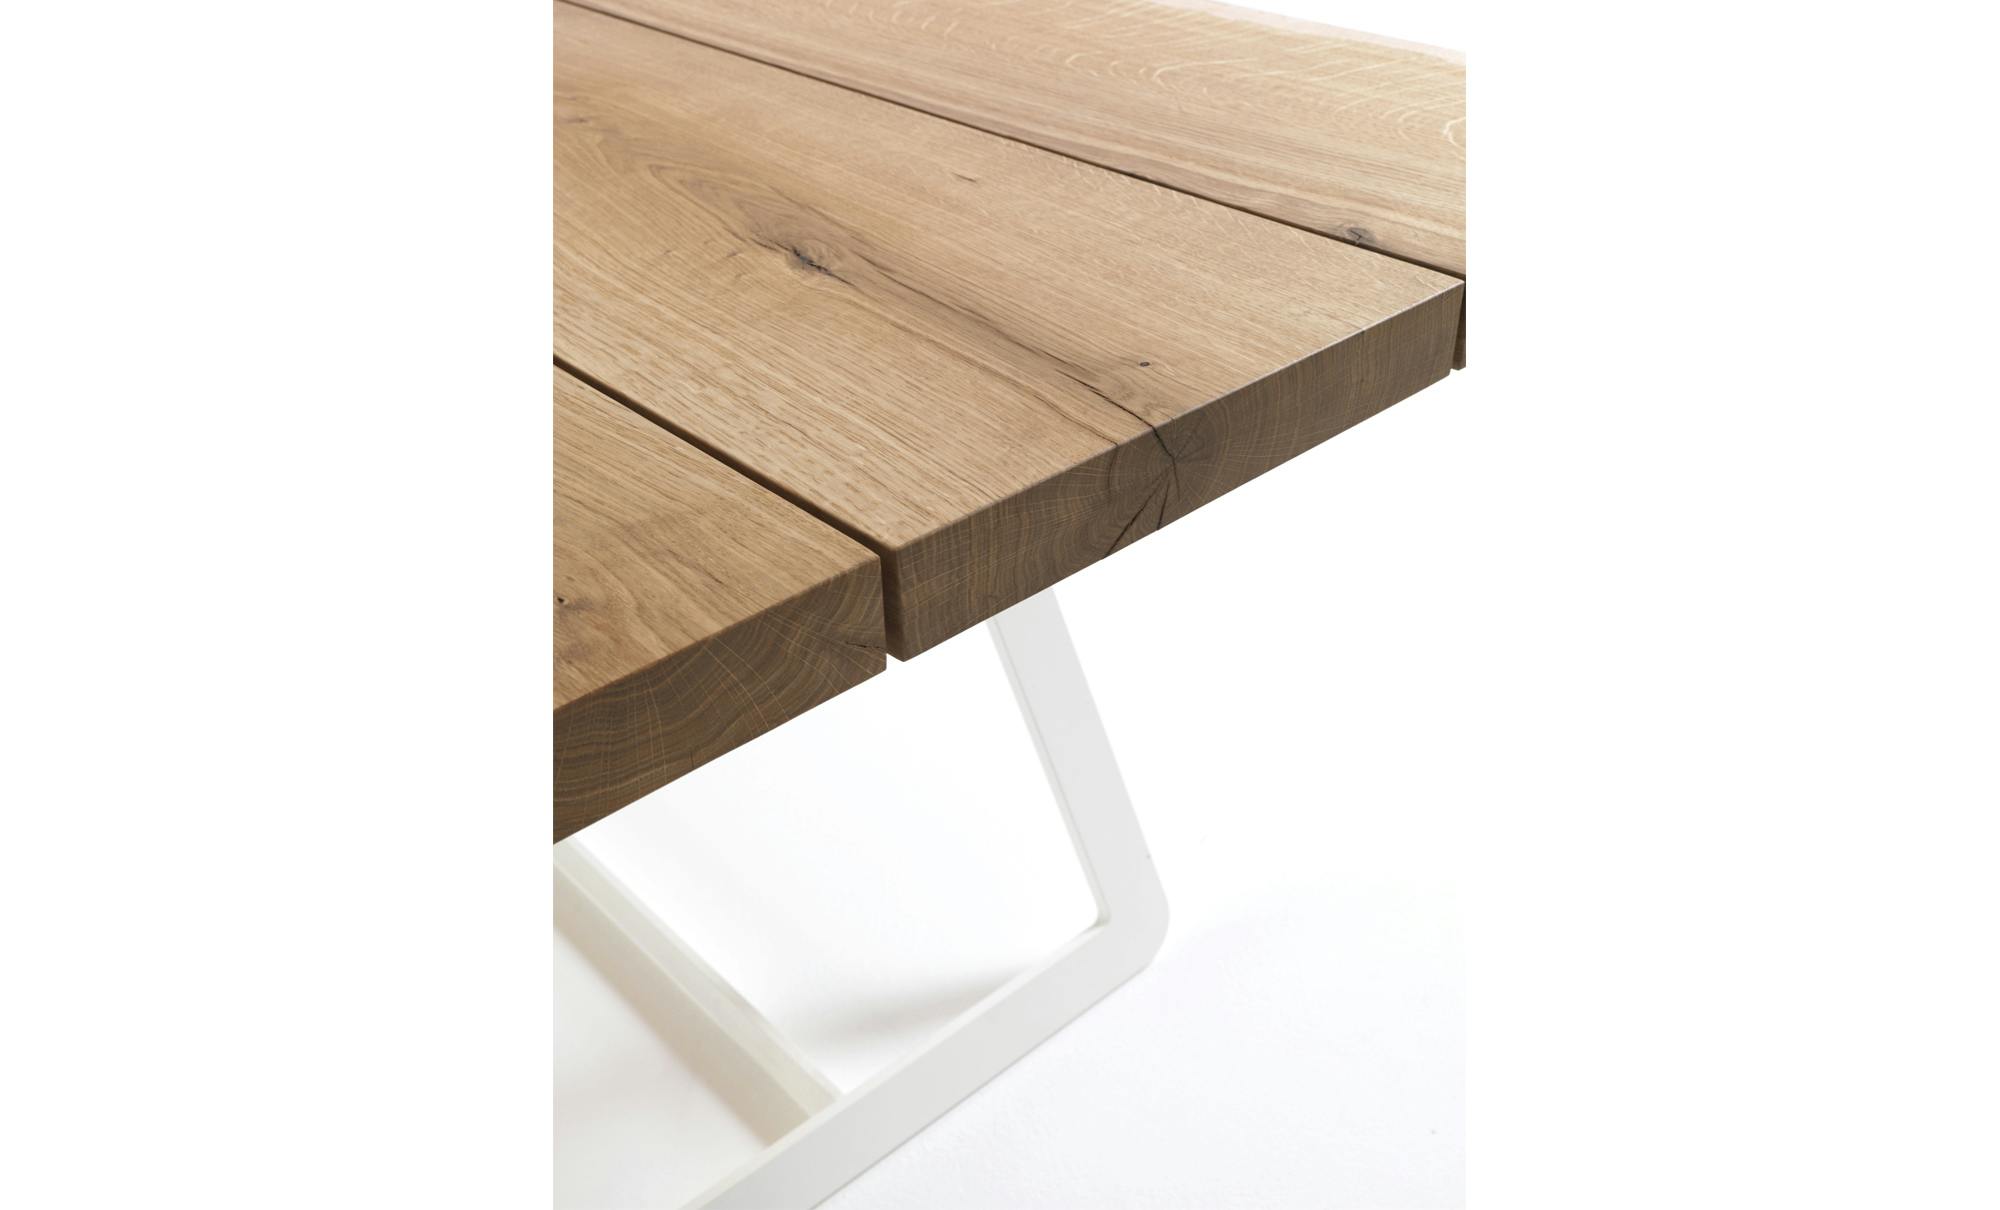 Calle Cult - Dining Tables - Fanuli Furniture